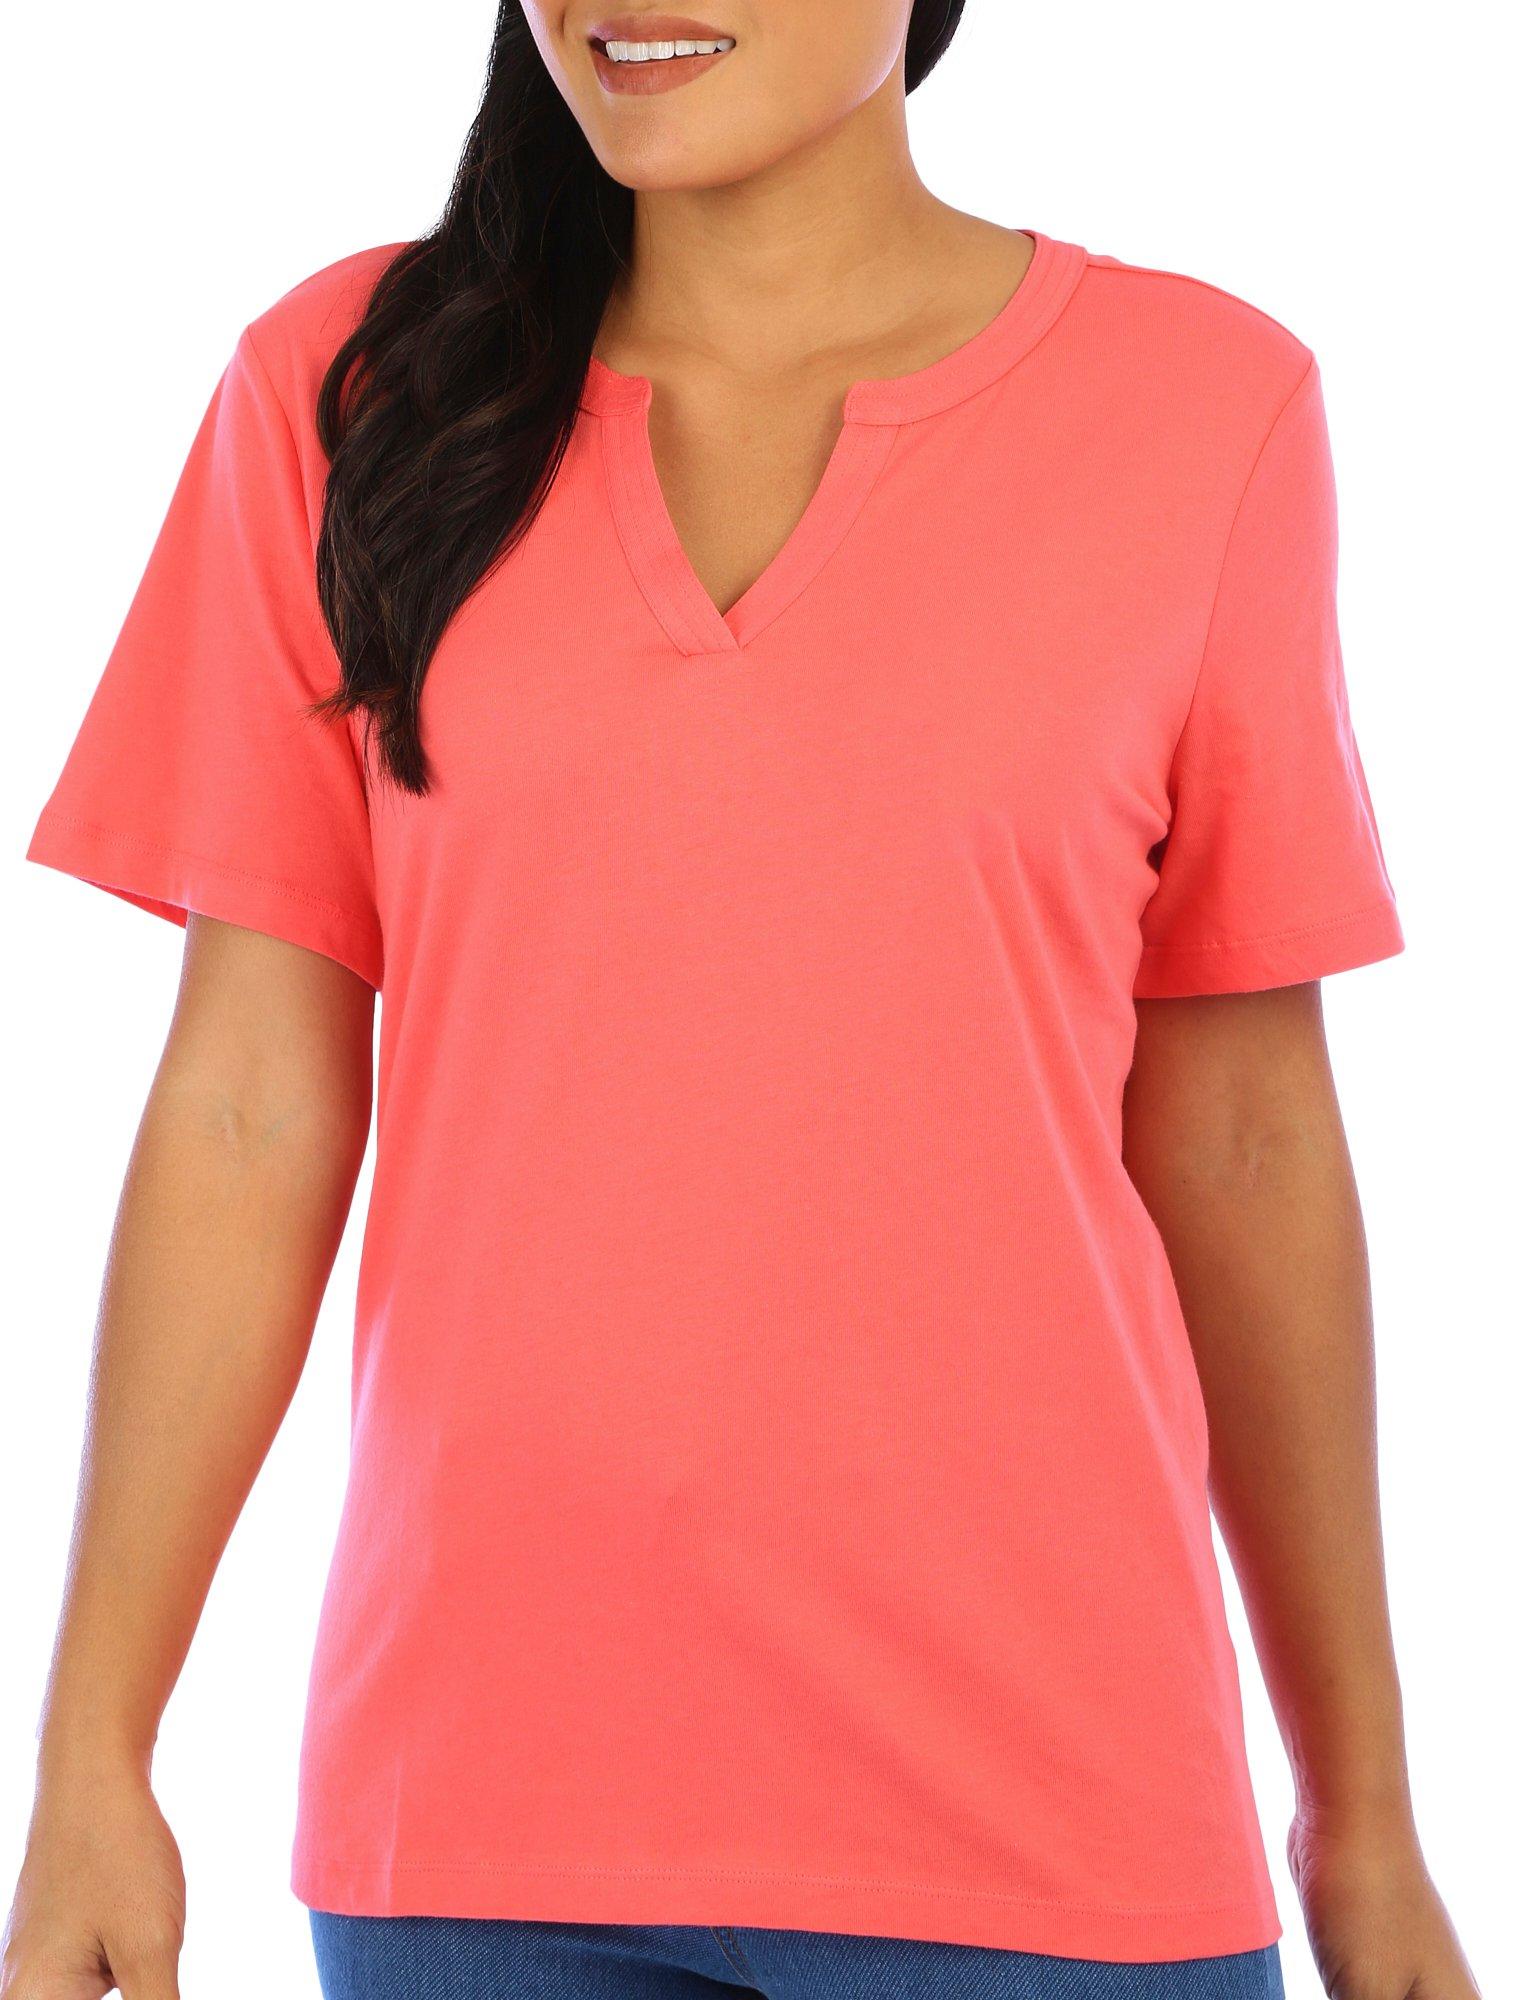 Coral Bay Womens Solid Split Neck Short Sleeve